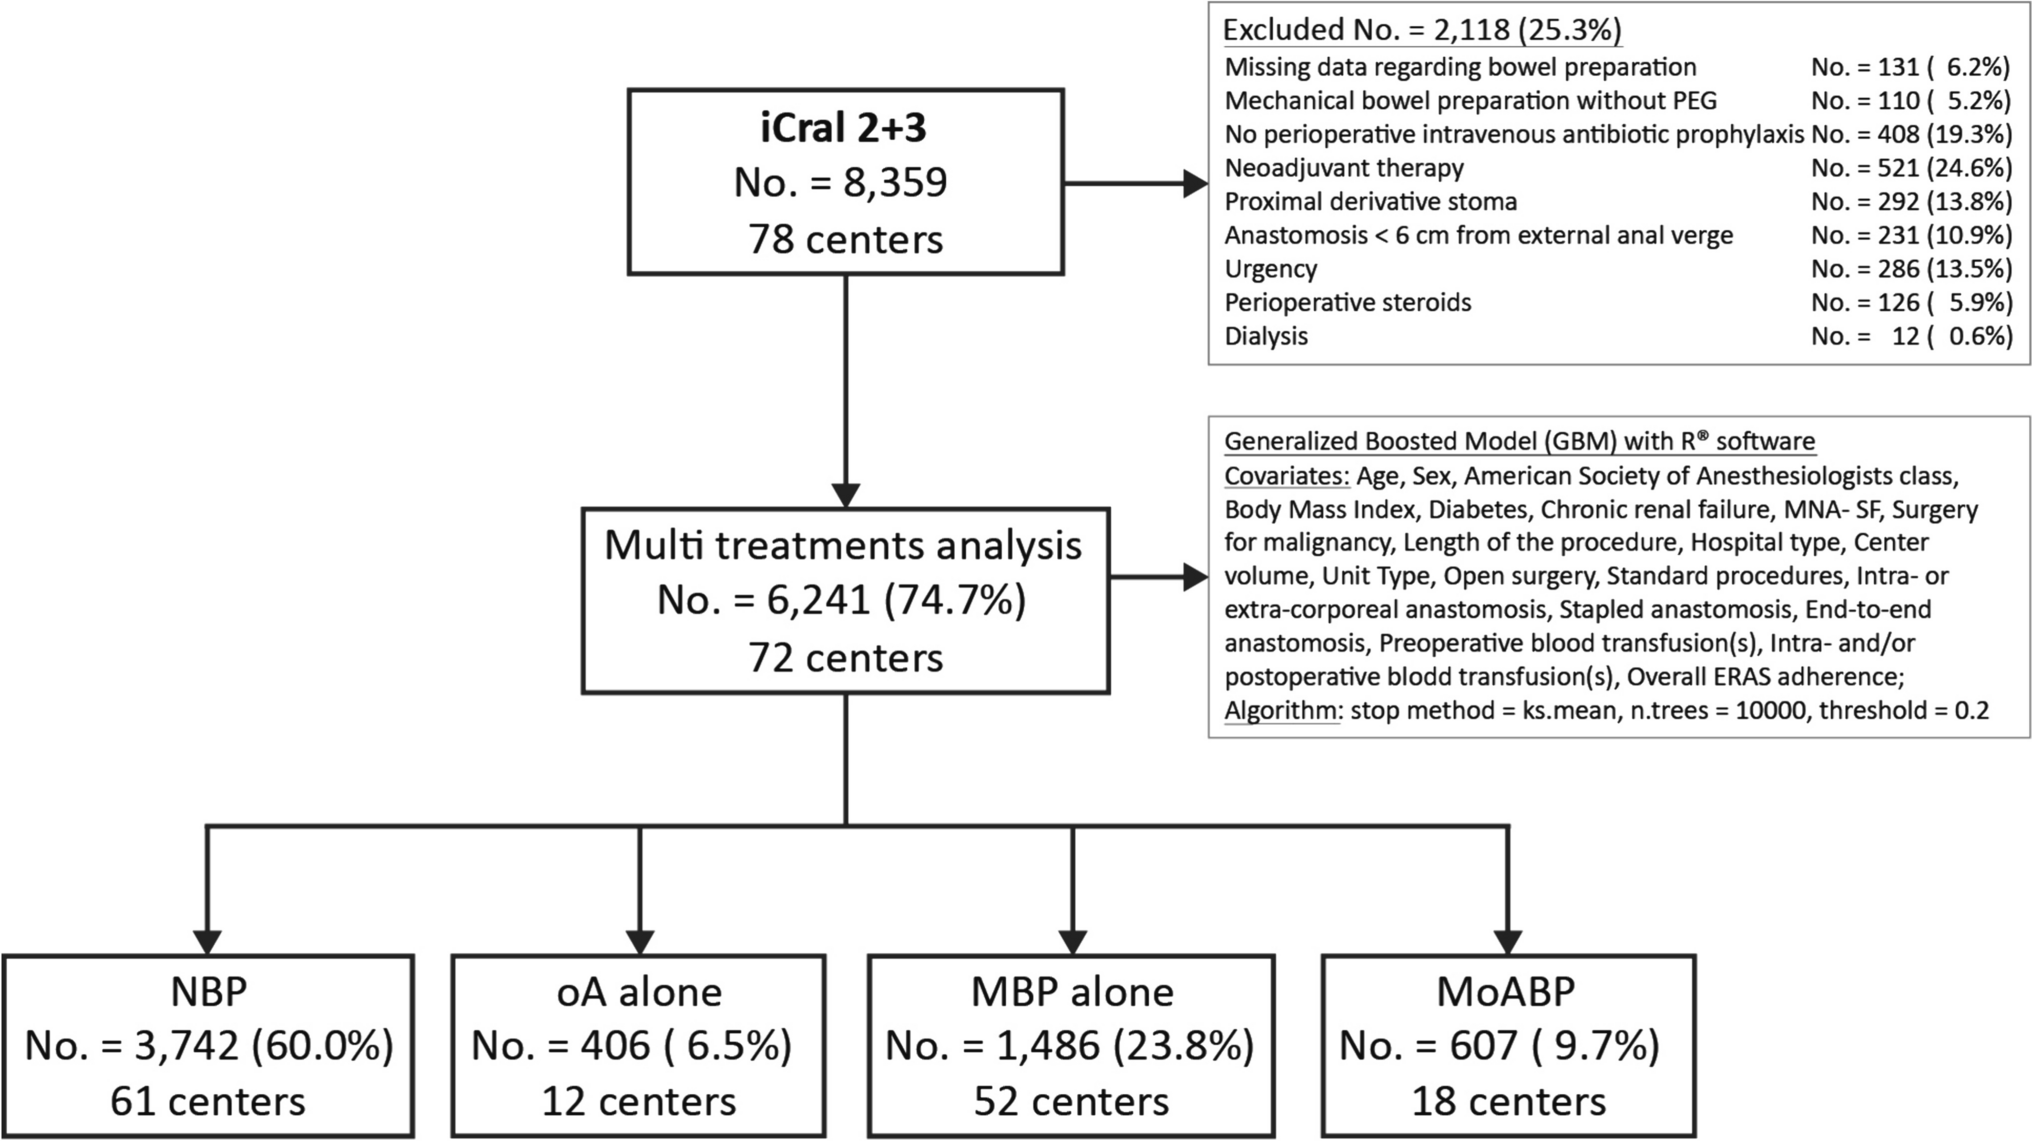 Bowel preparation for elective colorectal resection: multi-treatment machine learning analysis on 6241 cases from a prospective Italian cohort